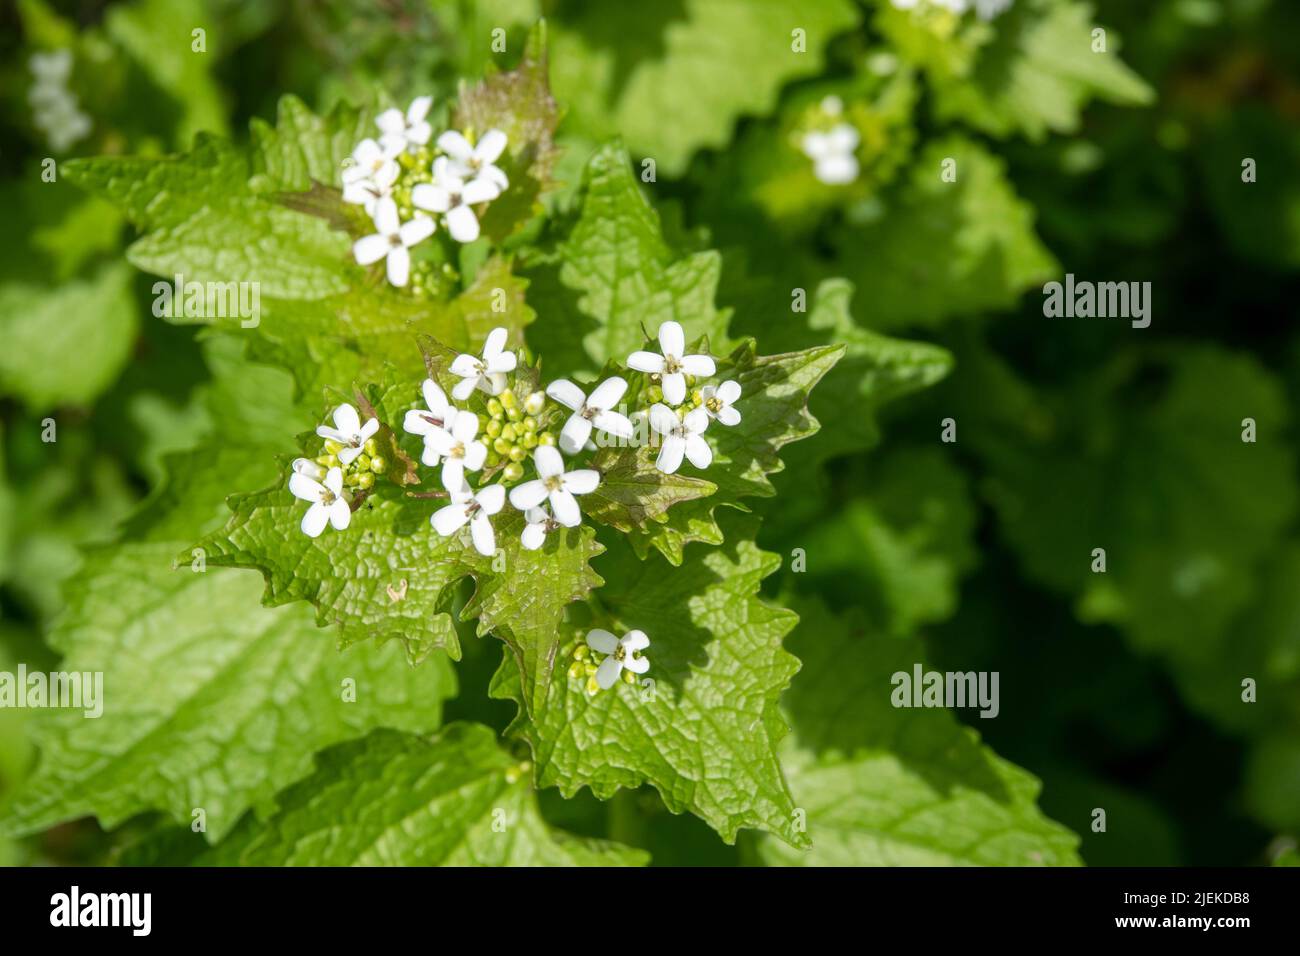 clusters of small white flowers and heart shaped leaves of garlic mustard plant also known as jack by the hedge Stock Photo